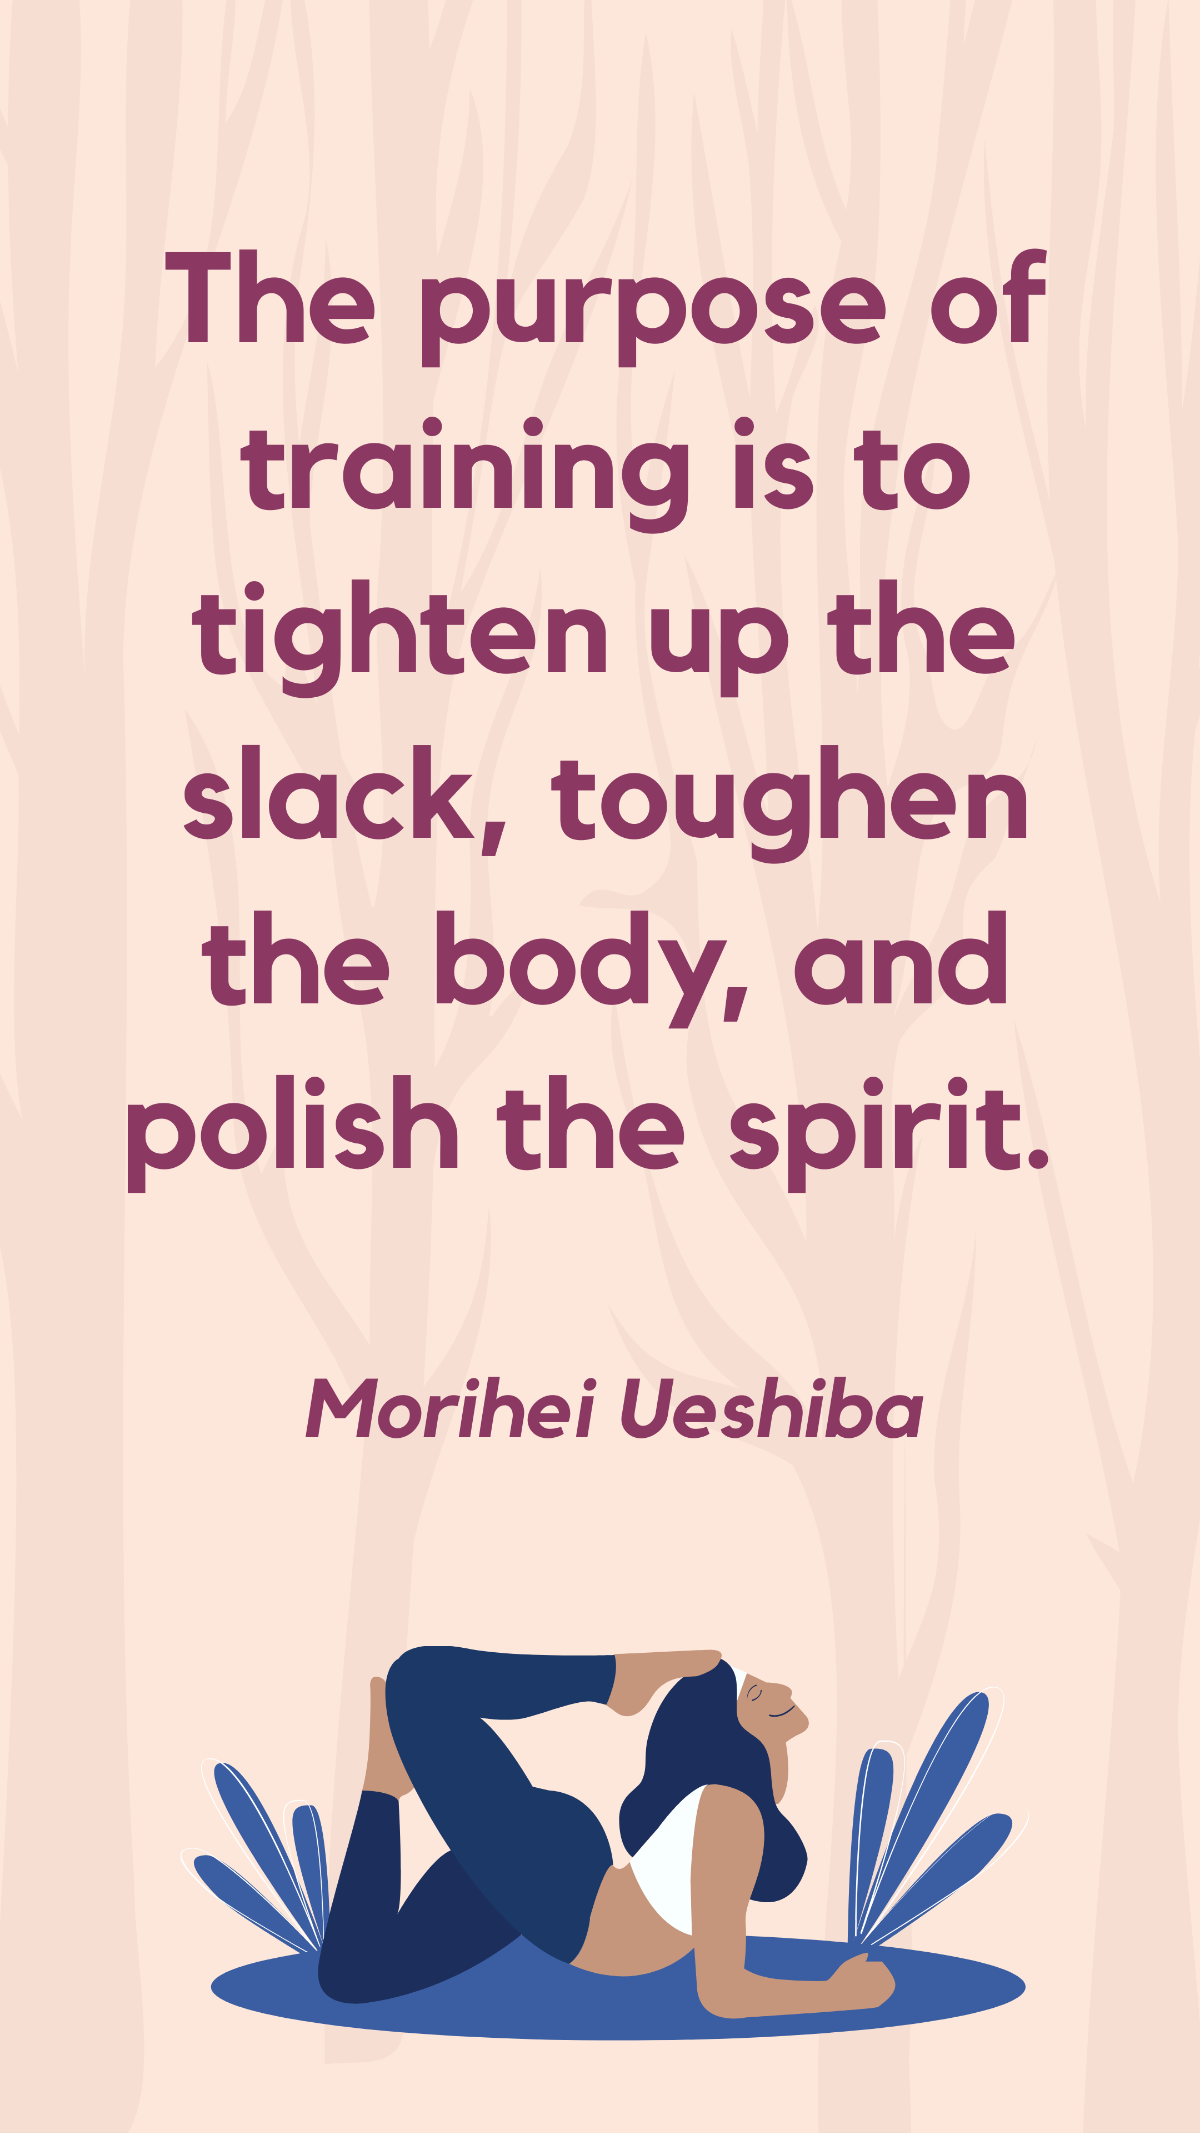 Morihei Ueshiba - The purpose of training is to tighten up the slack, toughen the body, and polish the spirit. Template